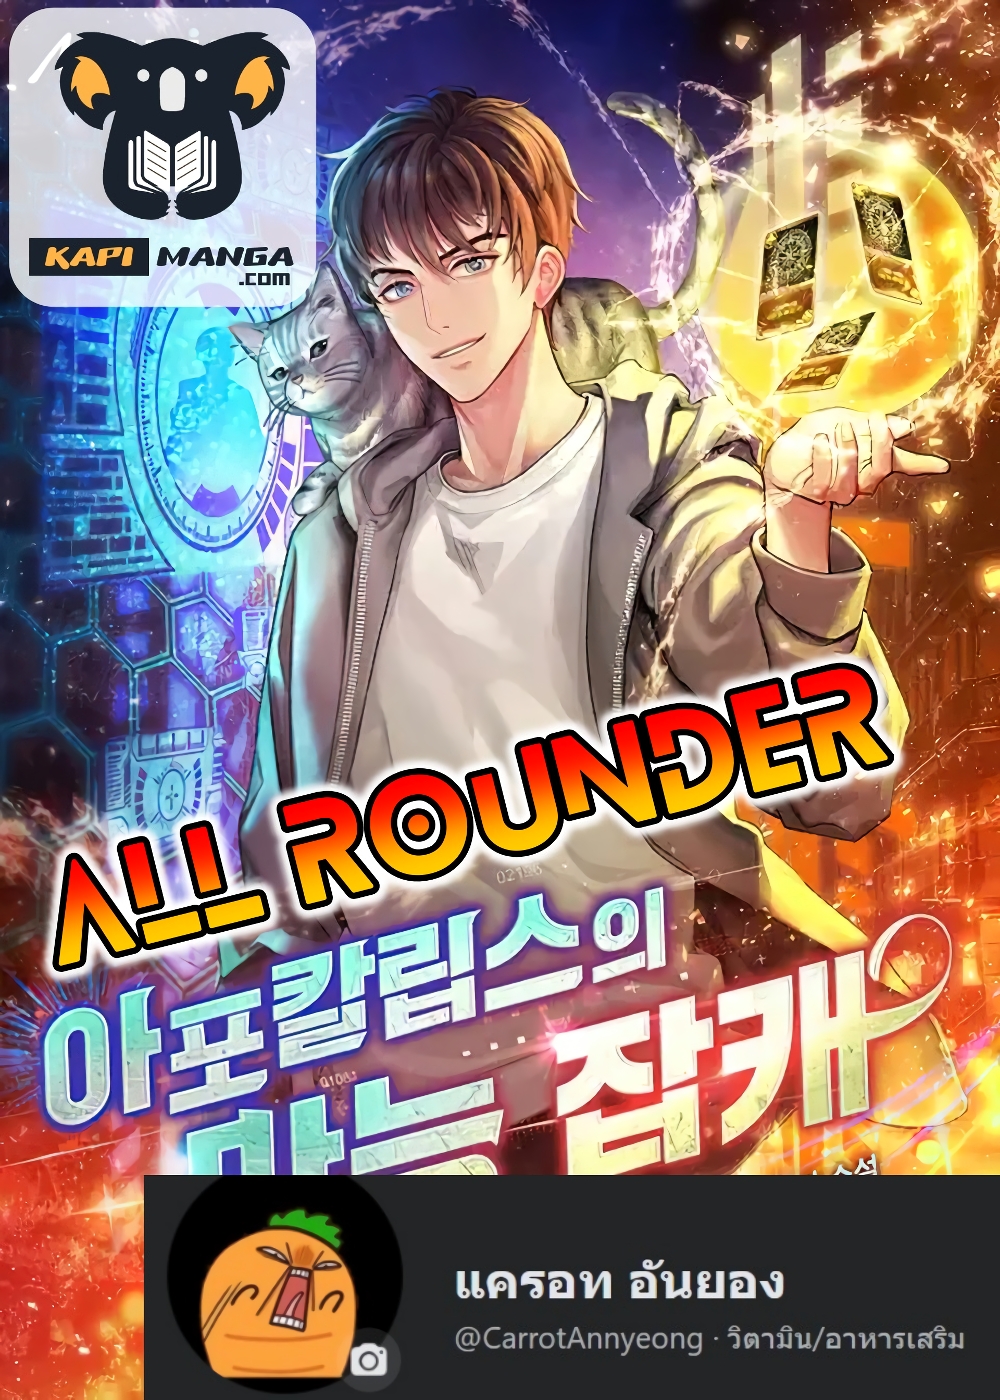 All Rounder12 (1)